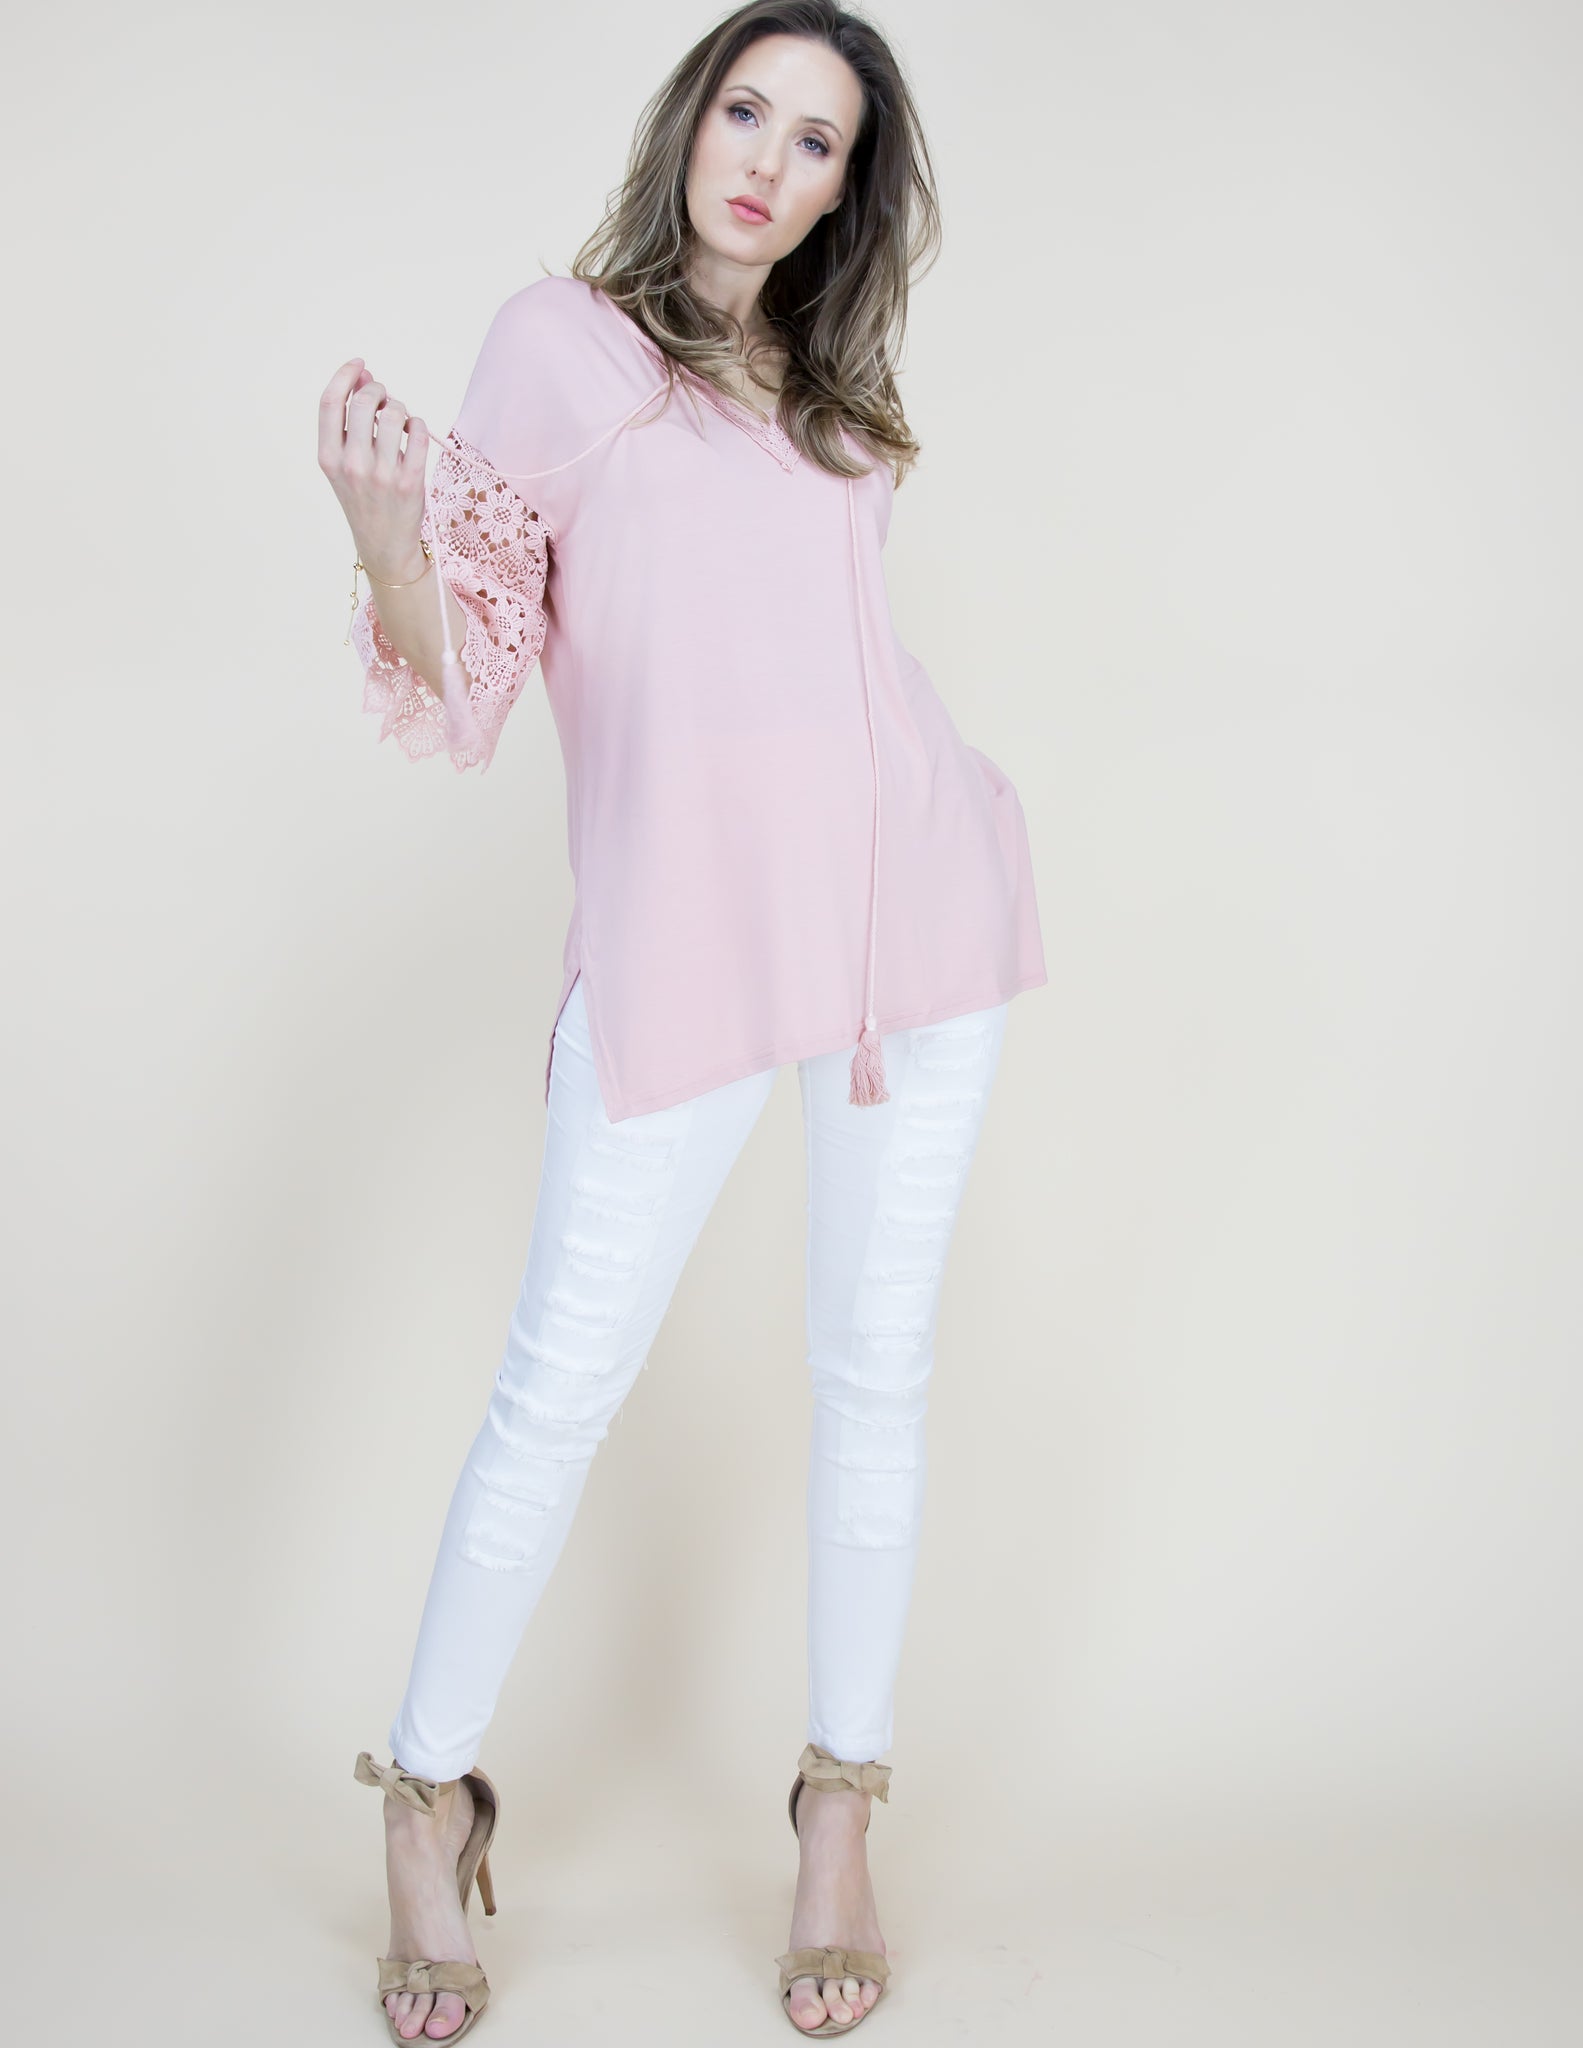 CLOTHING - WOMEN'S LACE DUSTY ROSE 3/4 BELL SLEEVE TUNIC SHIRT